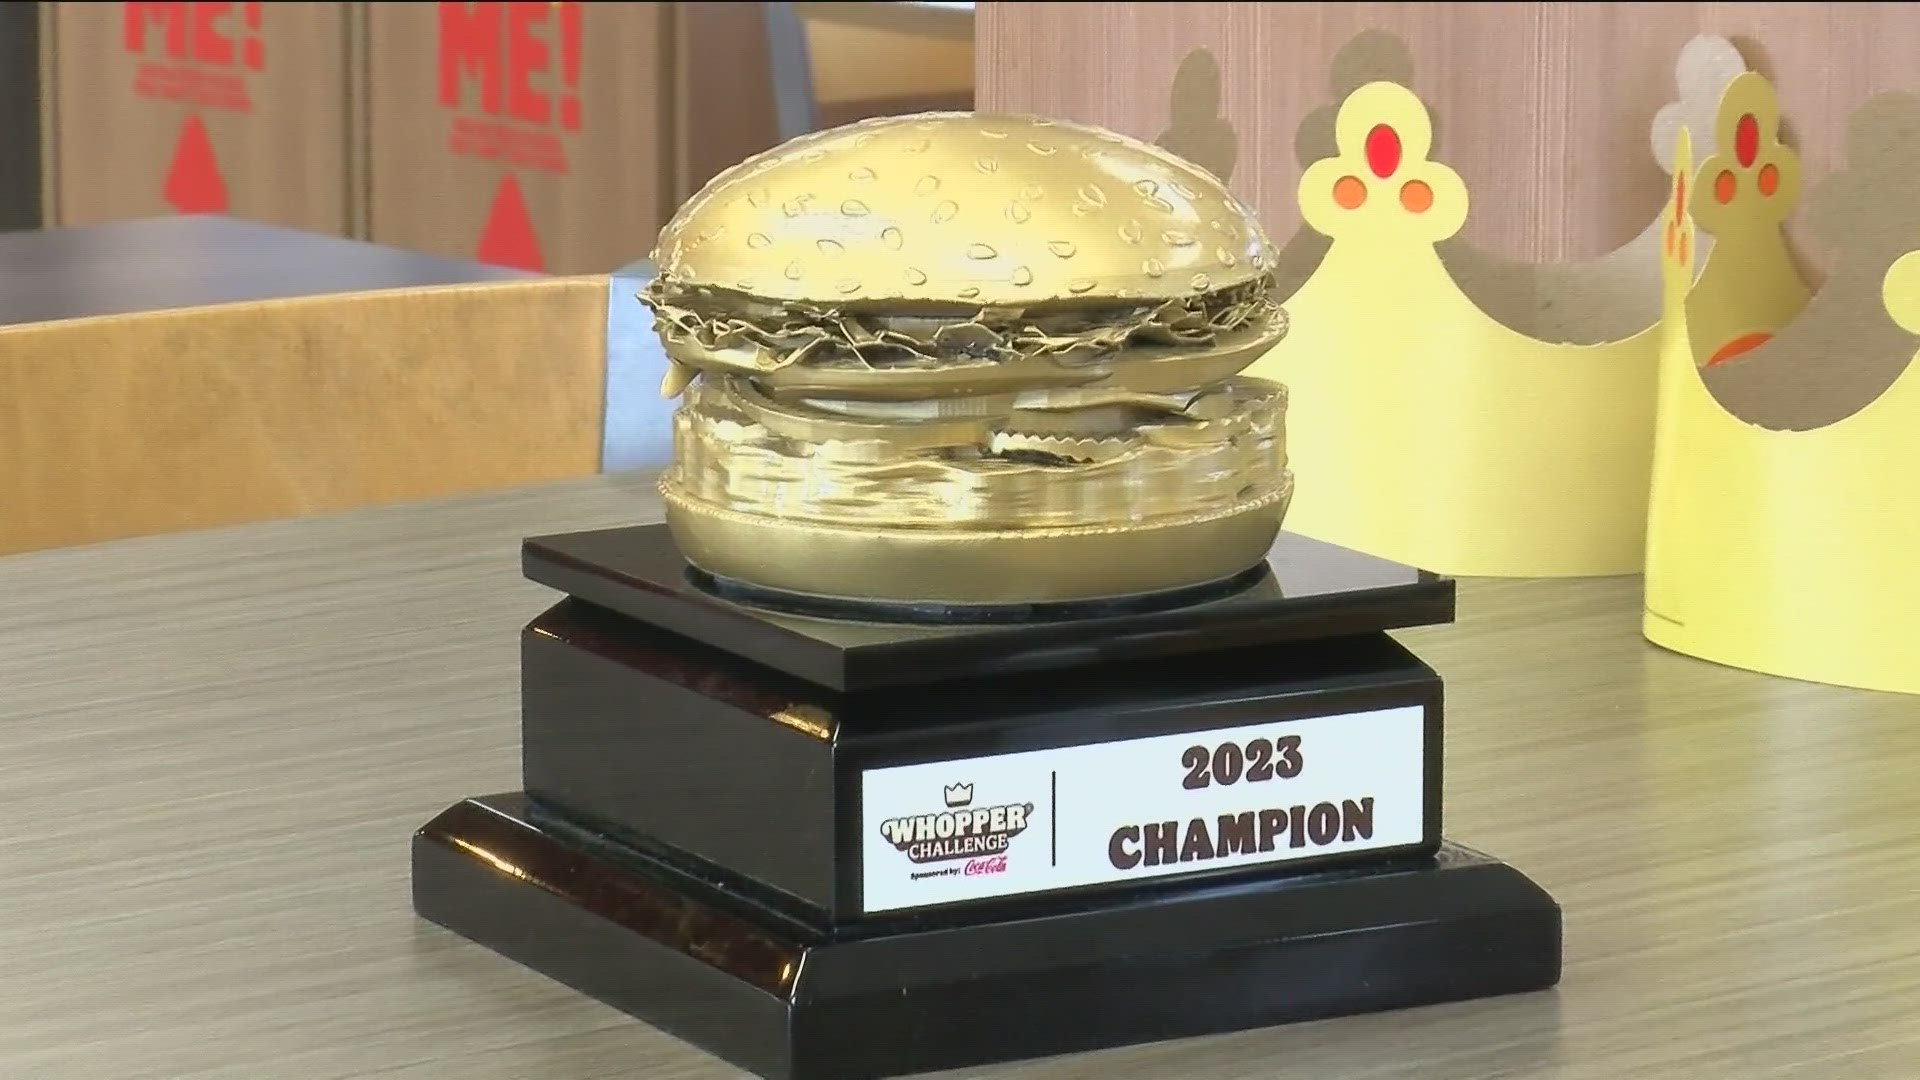 Burger King's top Whopper maker, Tahreem Gear, won more than just the title and a trophy, bringing $10,000 for herself and glory for the Navarre Ave. Burger King.